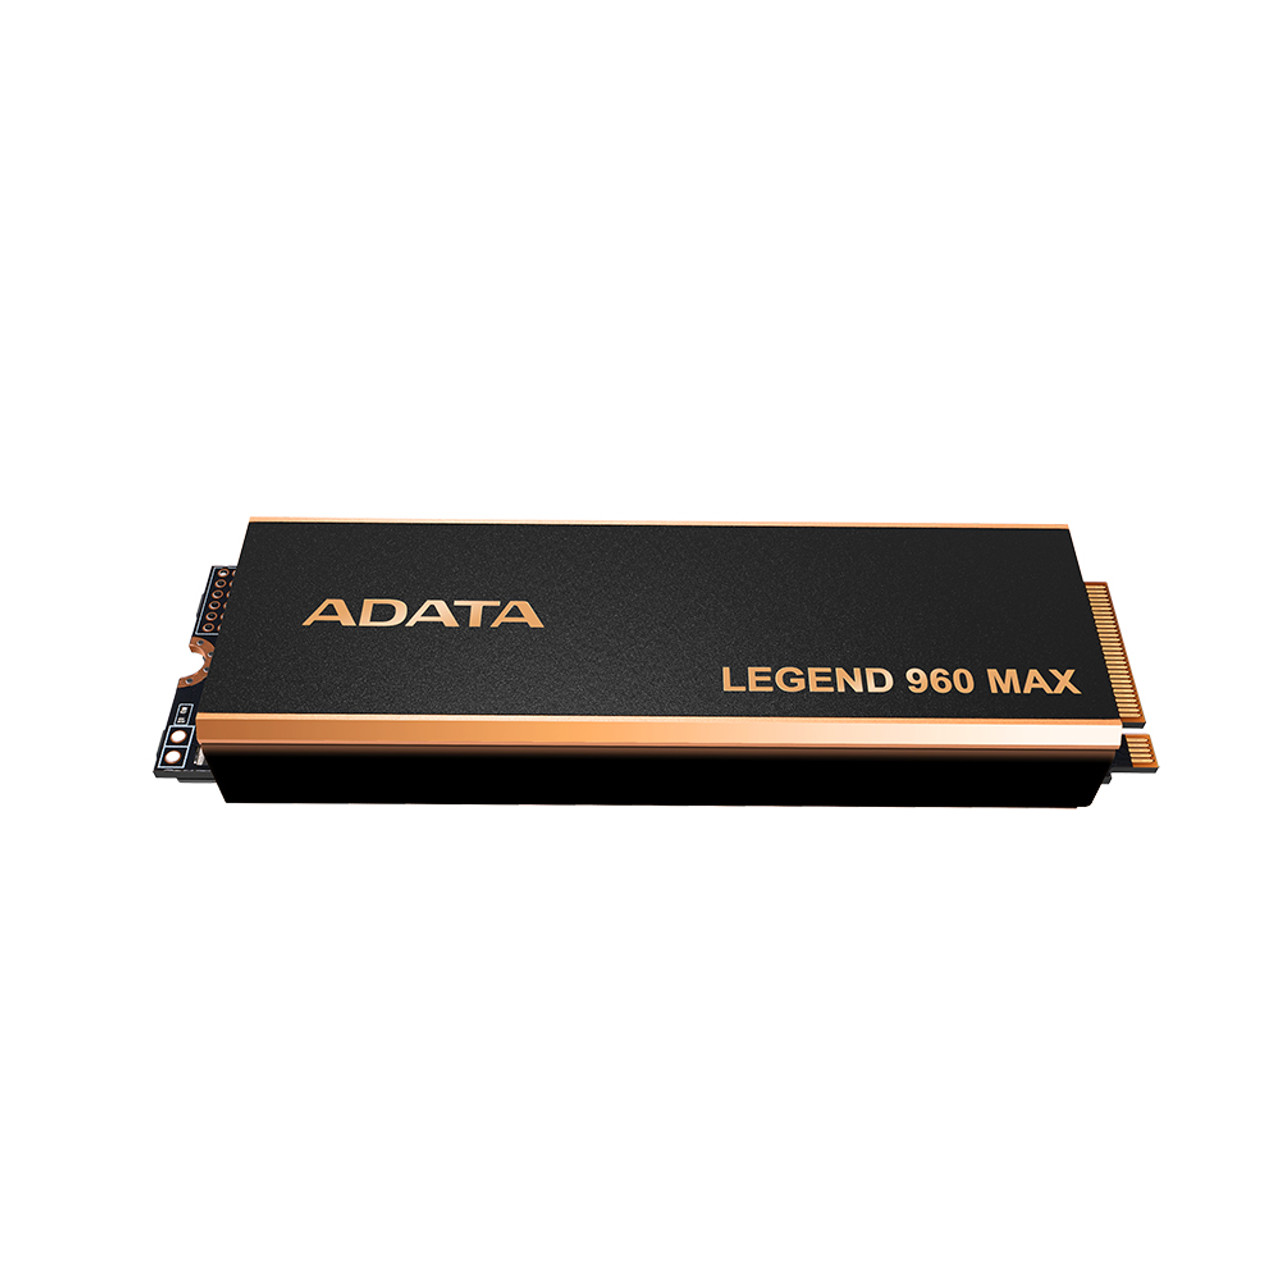 ADATA LEGEND 960 MAX 2TB M.2 2280 PCIe Gen4x4 Internal Solid State Drive |  1560TBW - SMI SM2264 3D NAND | Up to 7400 MBps - Black PS5 SSD 2 Terabyte | 